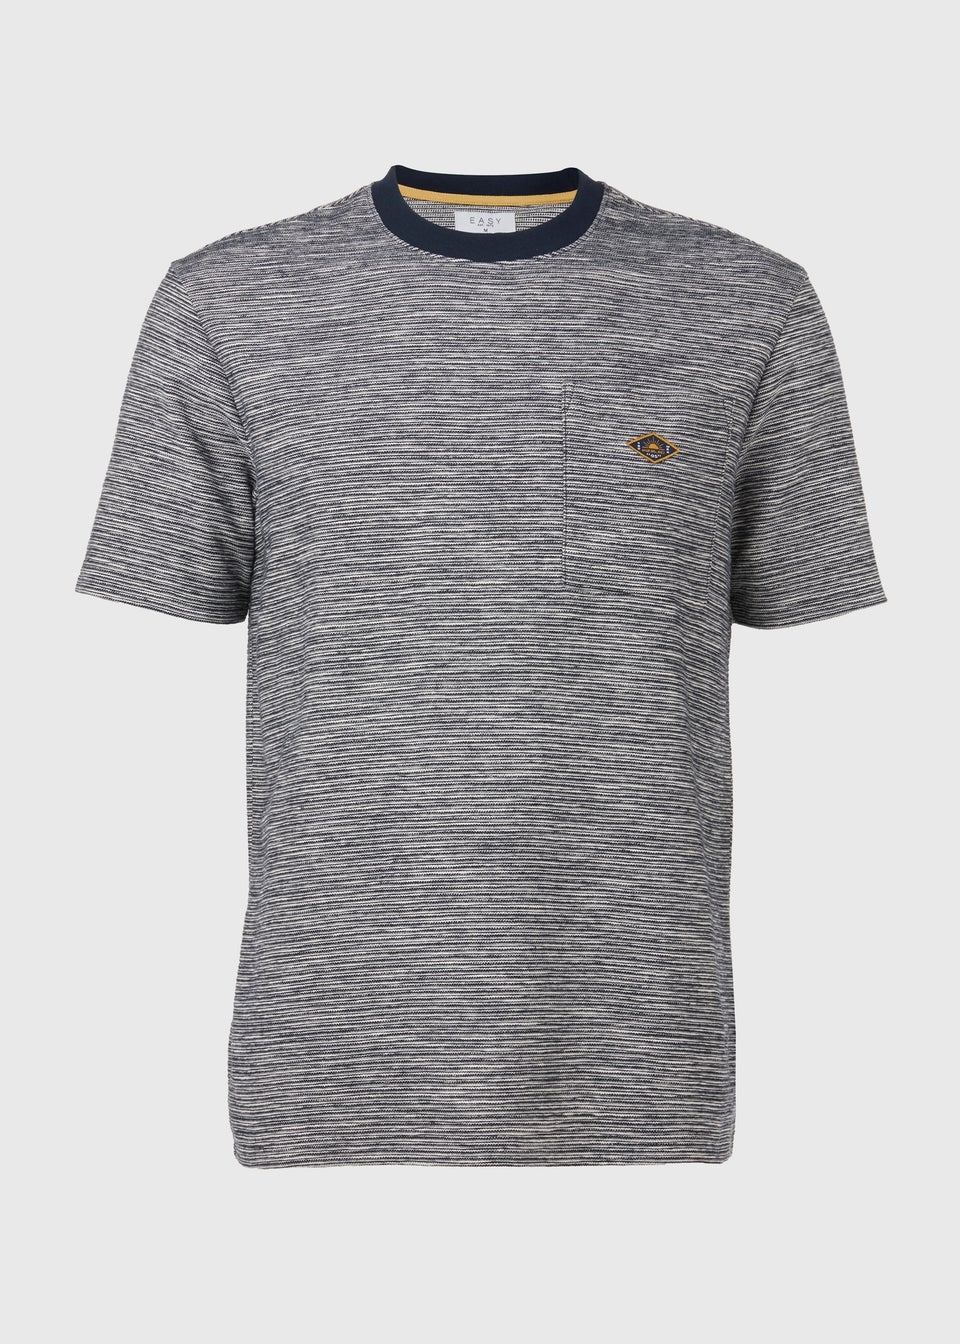 White & Navy Textured Embroidered T-Shirt